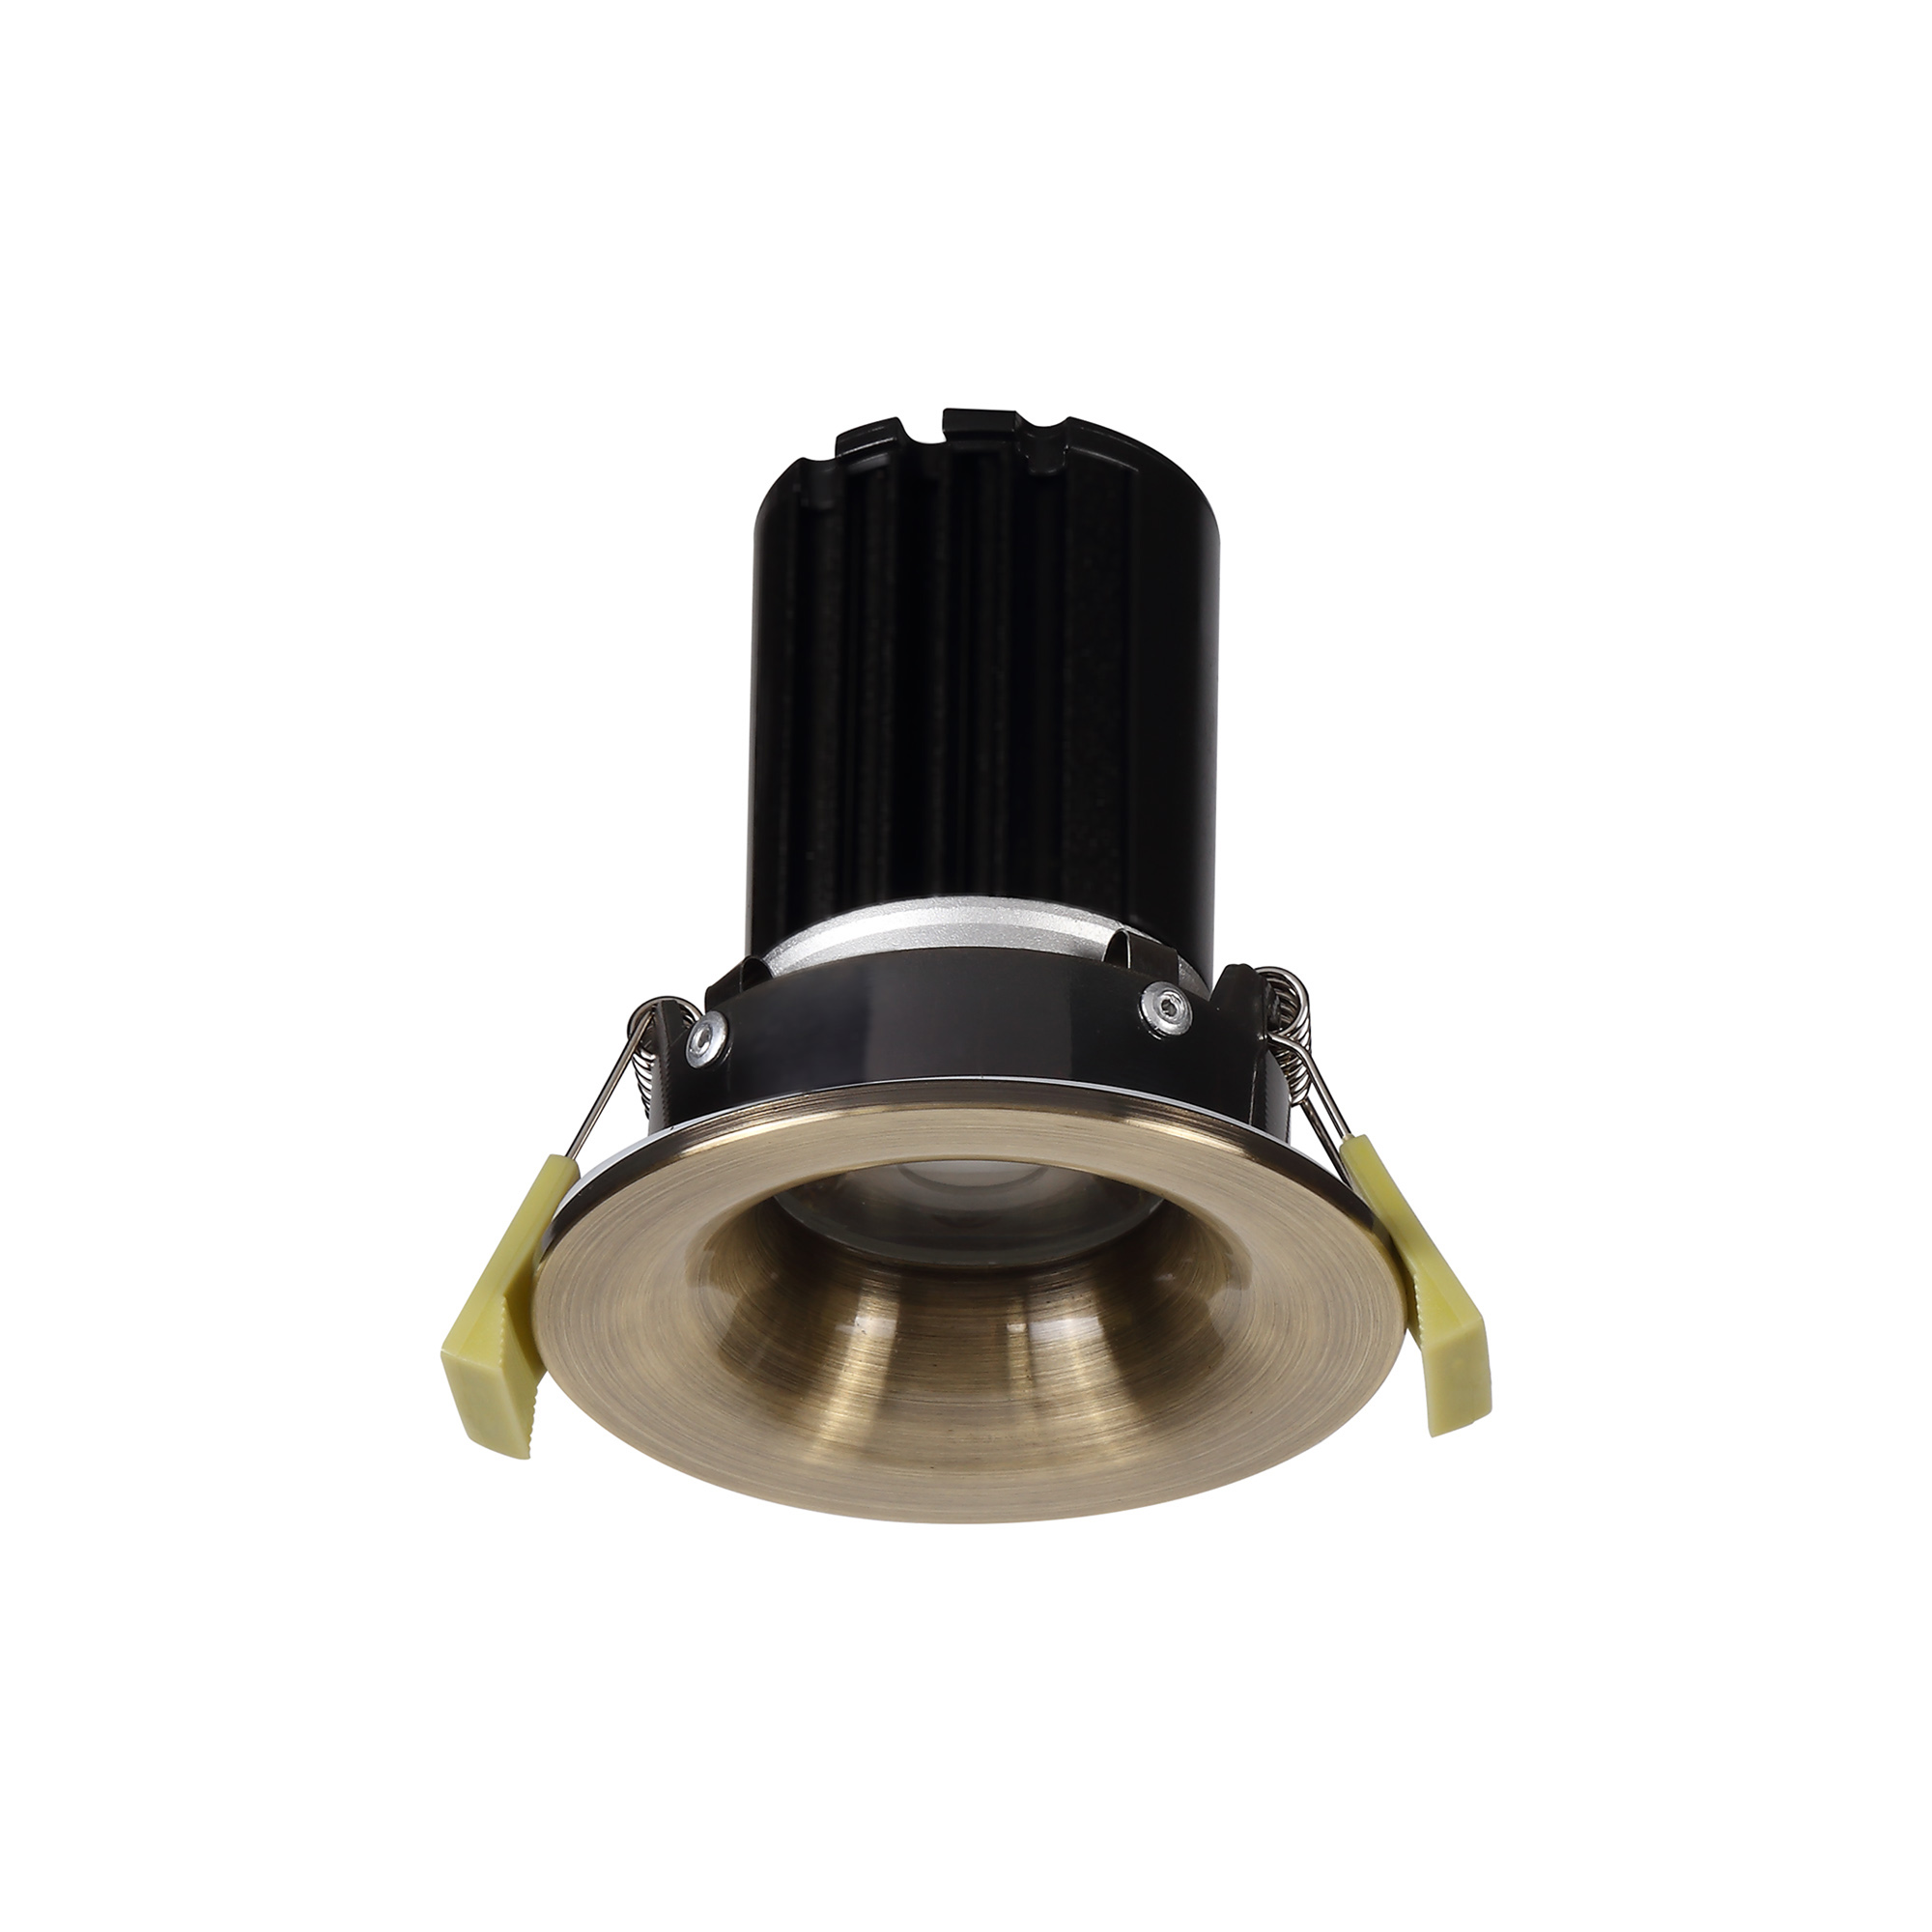 DM200790  Bruve 10 Tridonic powered 10W 2700K 750lm 12° CRI>90 LED Engine Antique Brass Fixed Round Recessed Downlight; Inner Glass cover; IP65